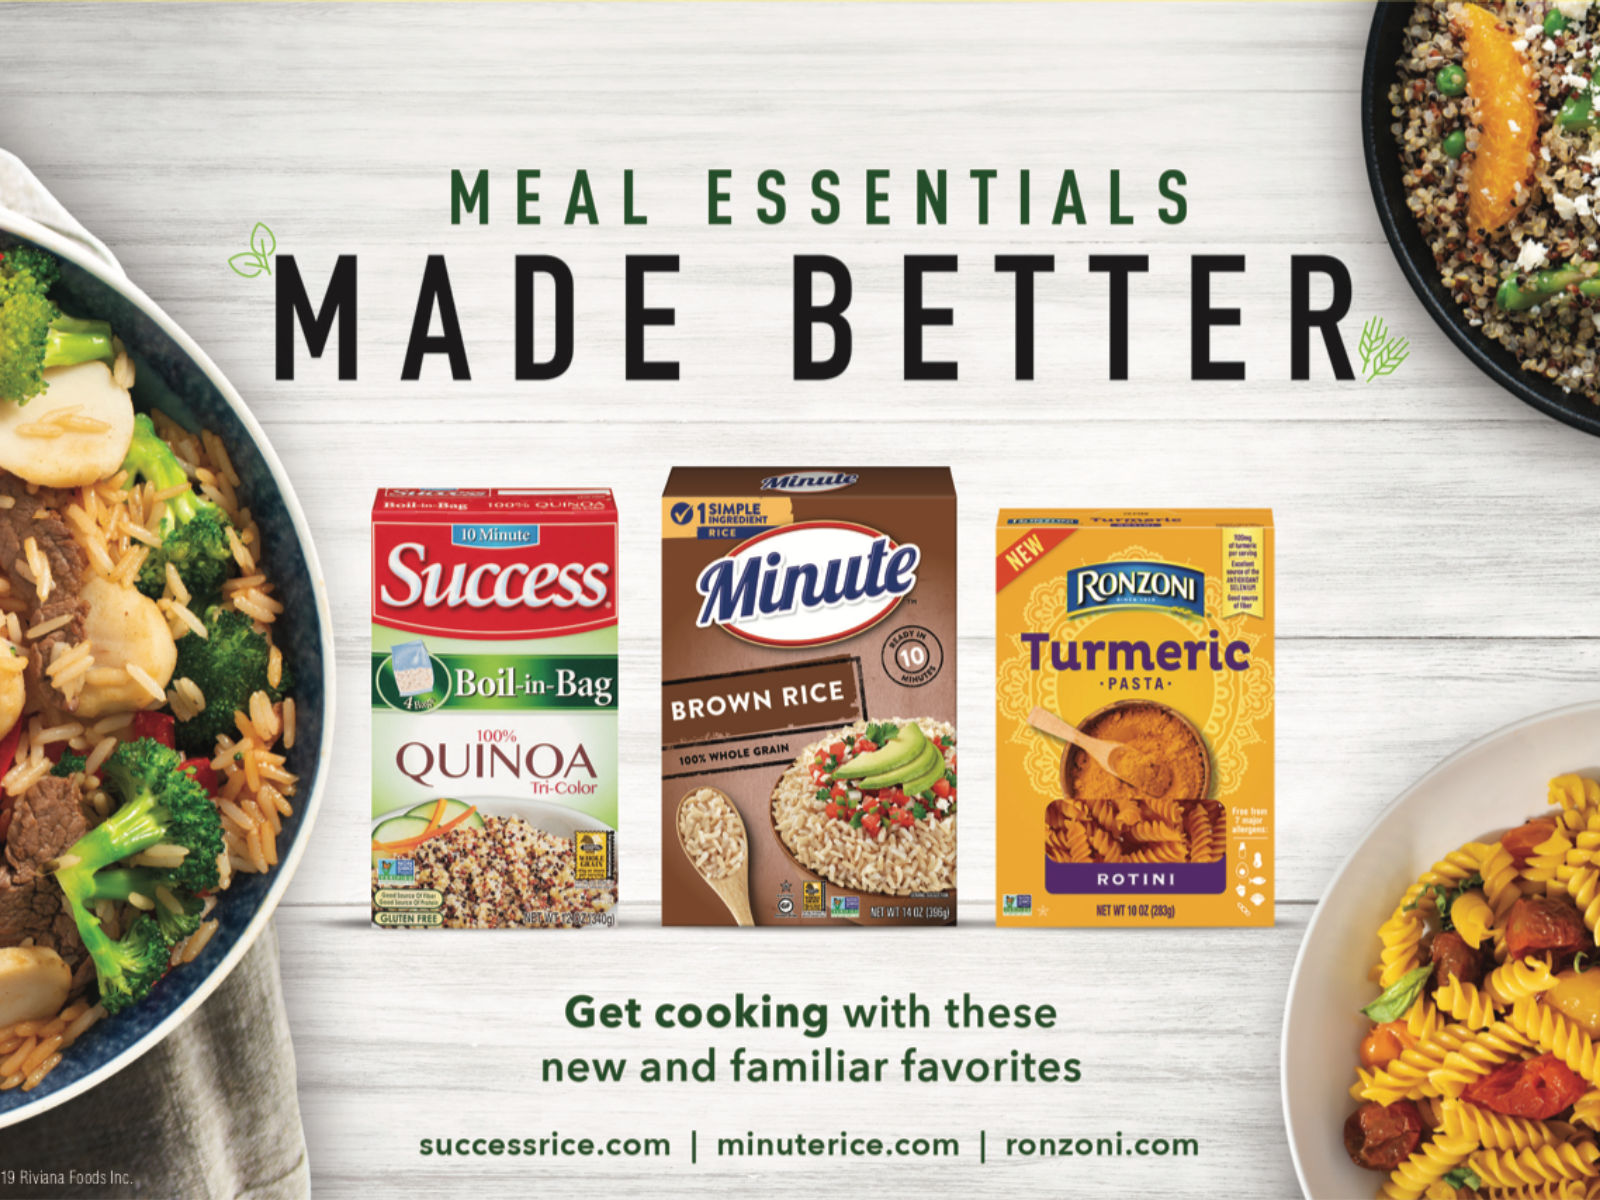 Don’t Miss Savings On Ronzoni, Minute, Success and Mahatma Rice Products – Save Up To $6 At Publix